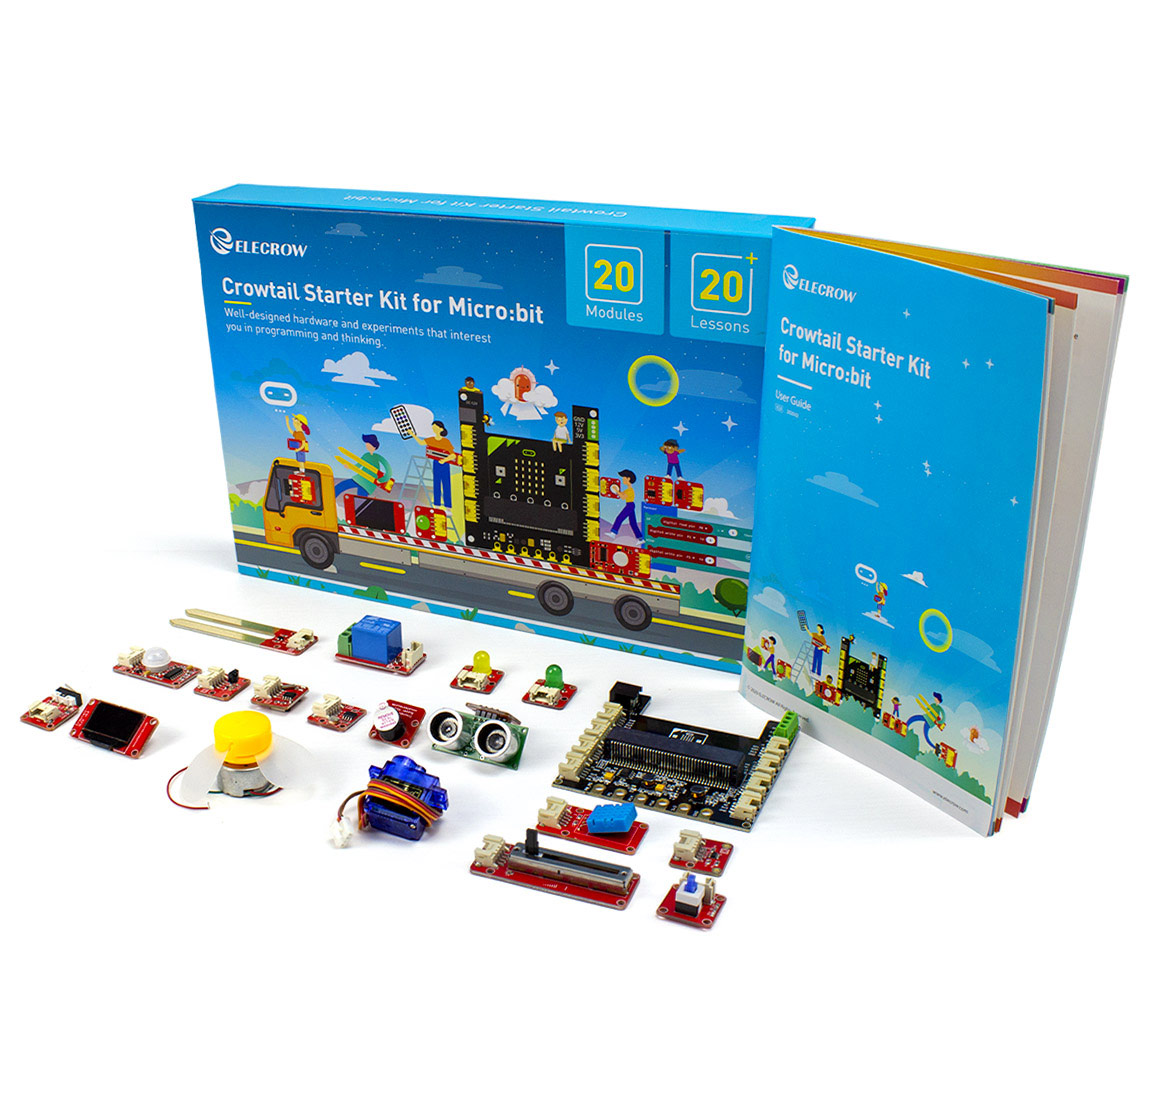 New Arrival: Crowtail Starter Kits for Micro: bit